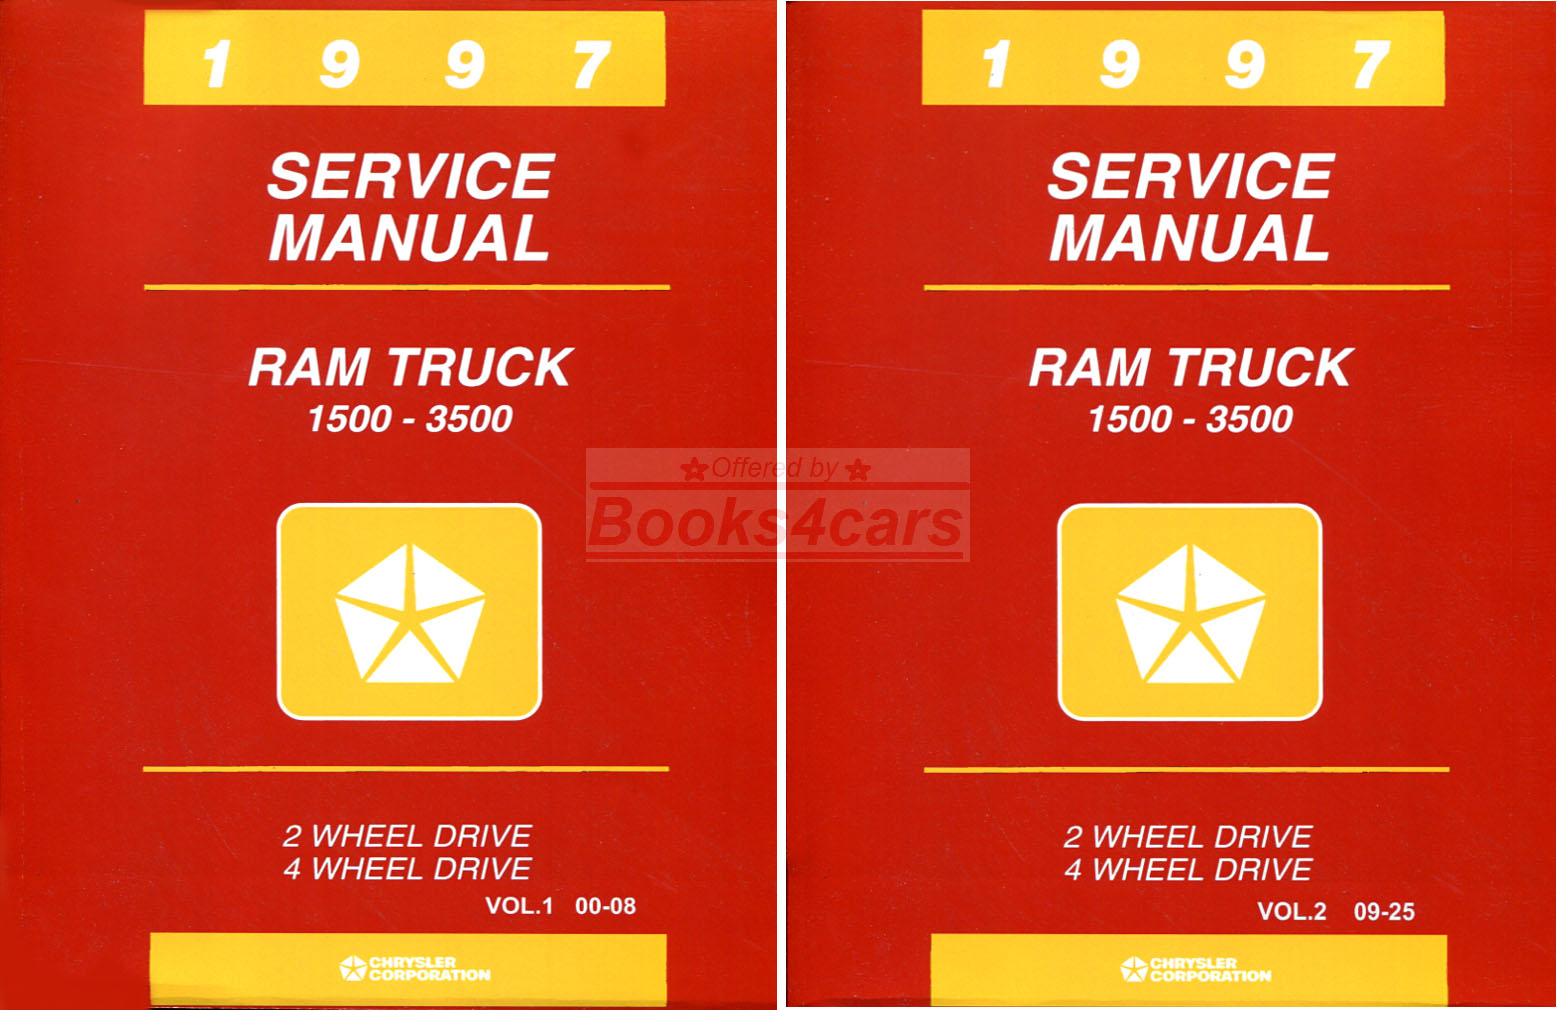 97 Ram Truck 1500-3500 Shop Service Repair Manual by Dodge Truck with complete coverage including all engines, both Gas & Diesel.